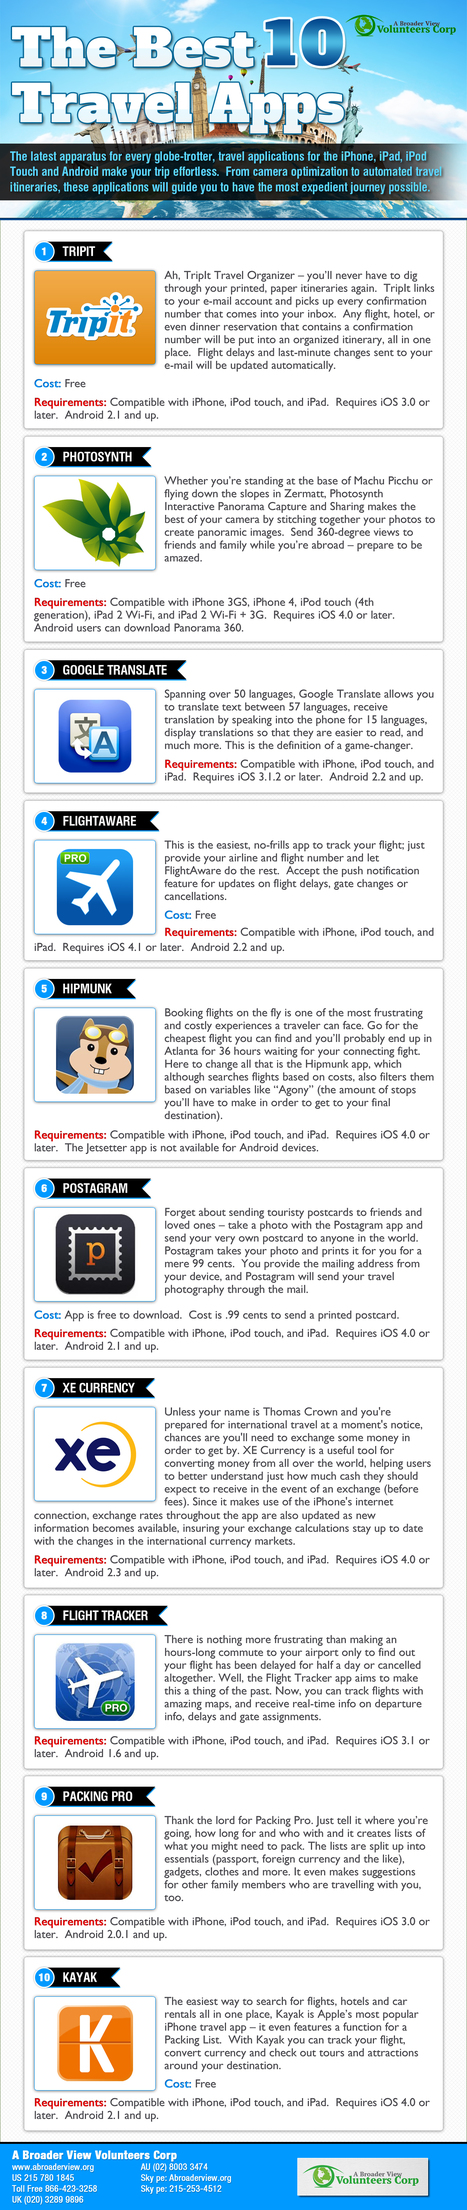 The Best 10 Travel Apps to Volunteer Abroad with Abroaderview.org | IPAD, un nuevo concepto socio-educativo! | Scoop.it